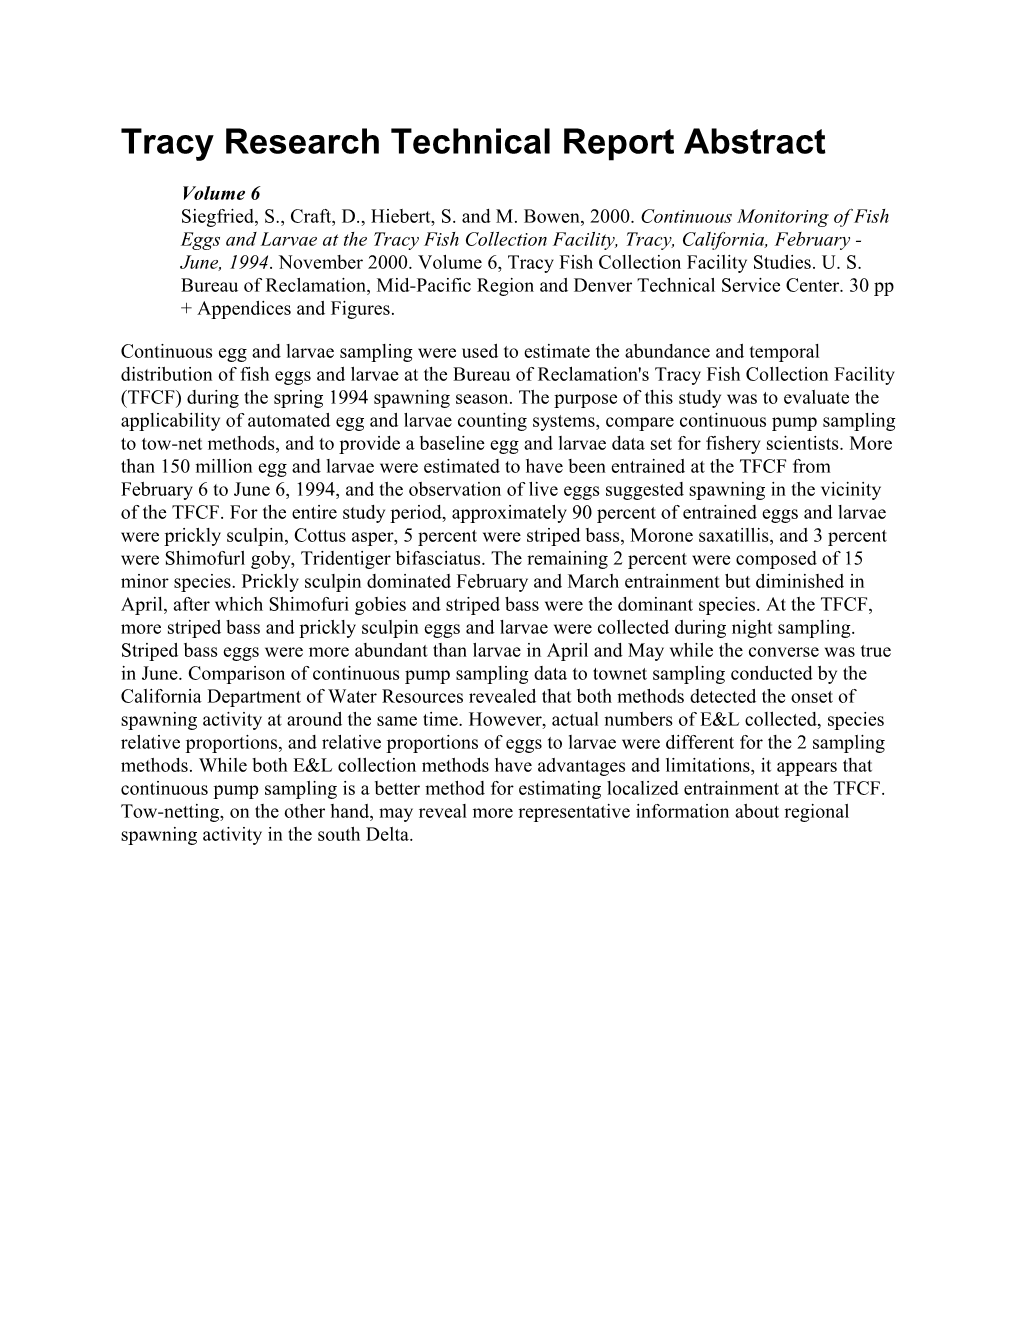 Tracy Research Tech Report Abstract Vol. 6